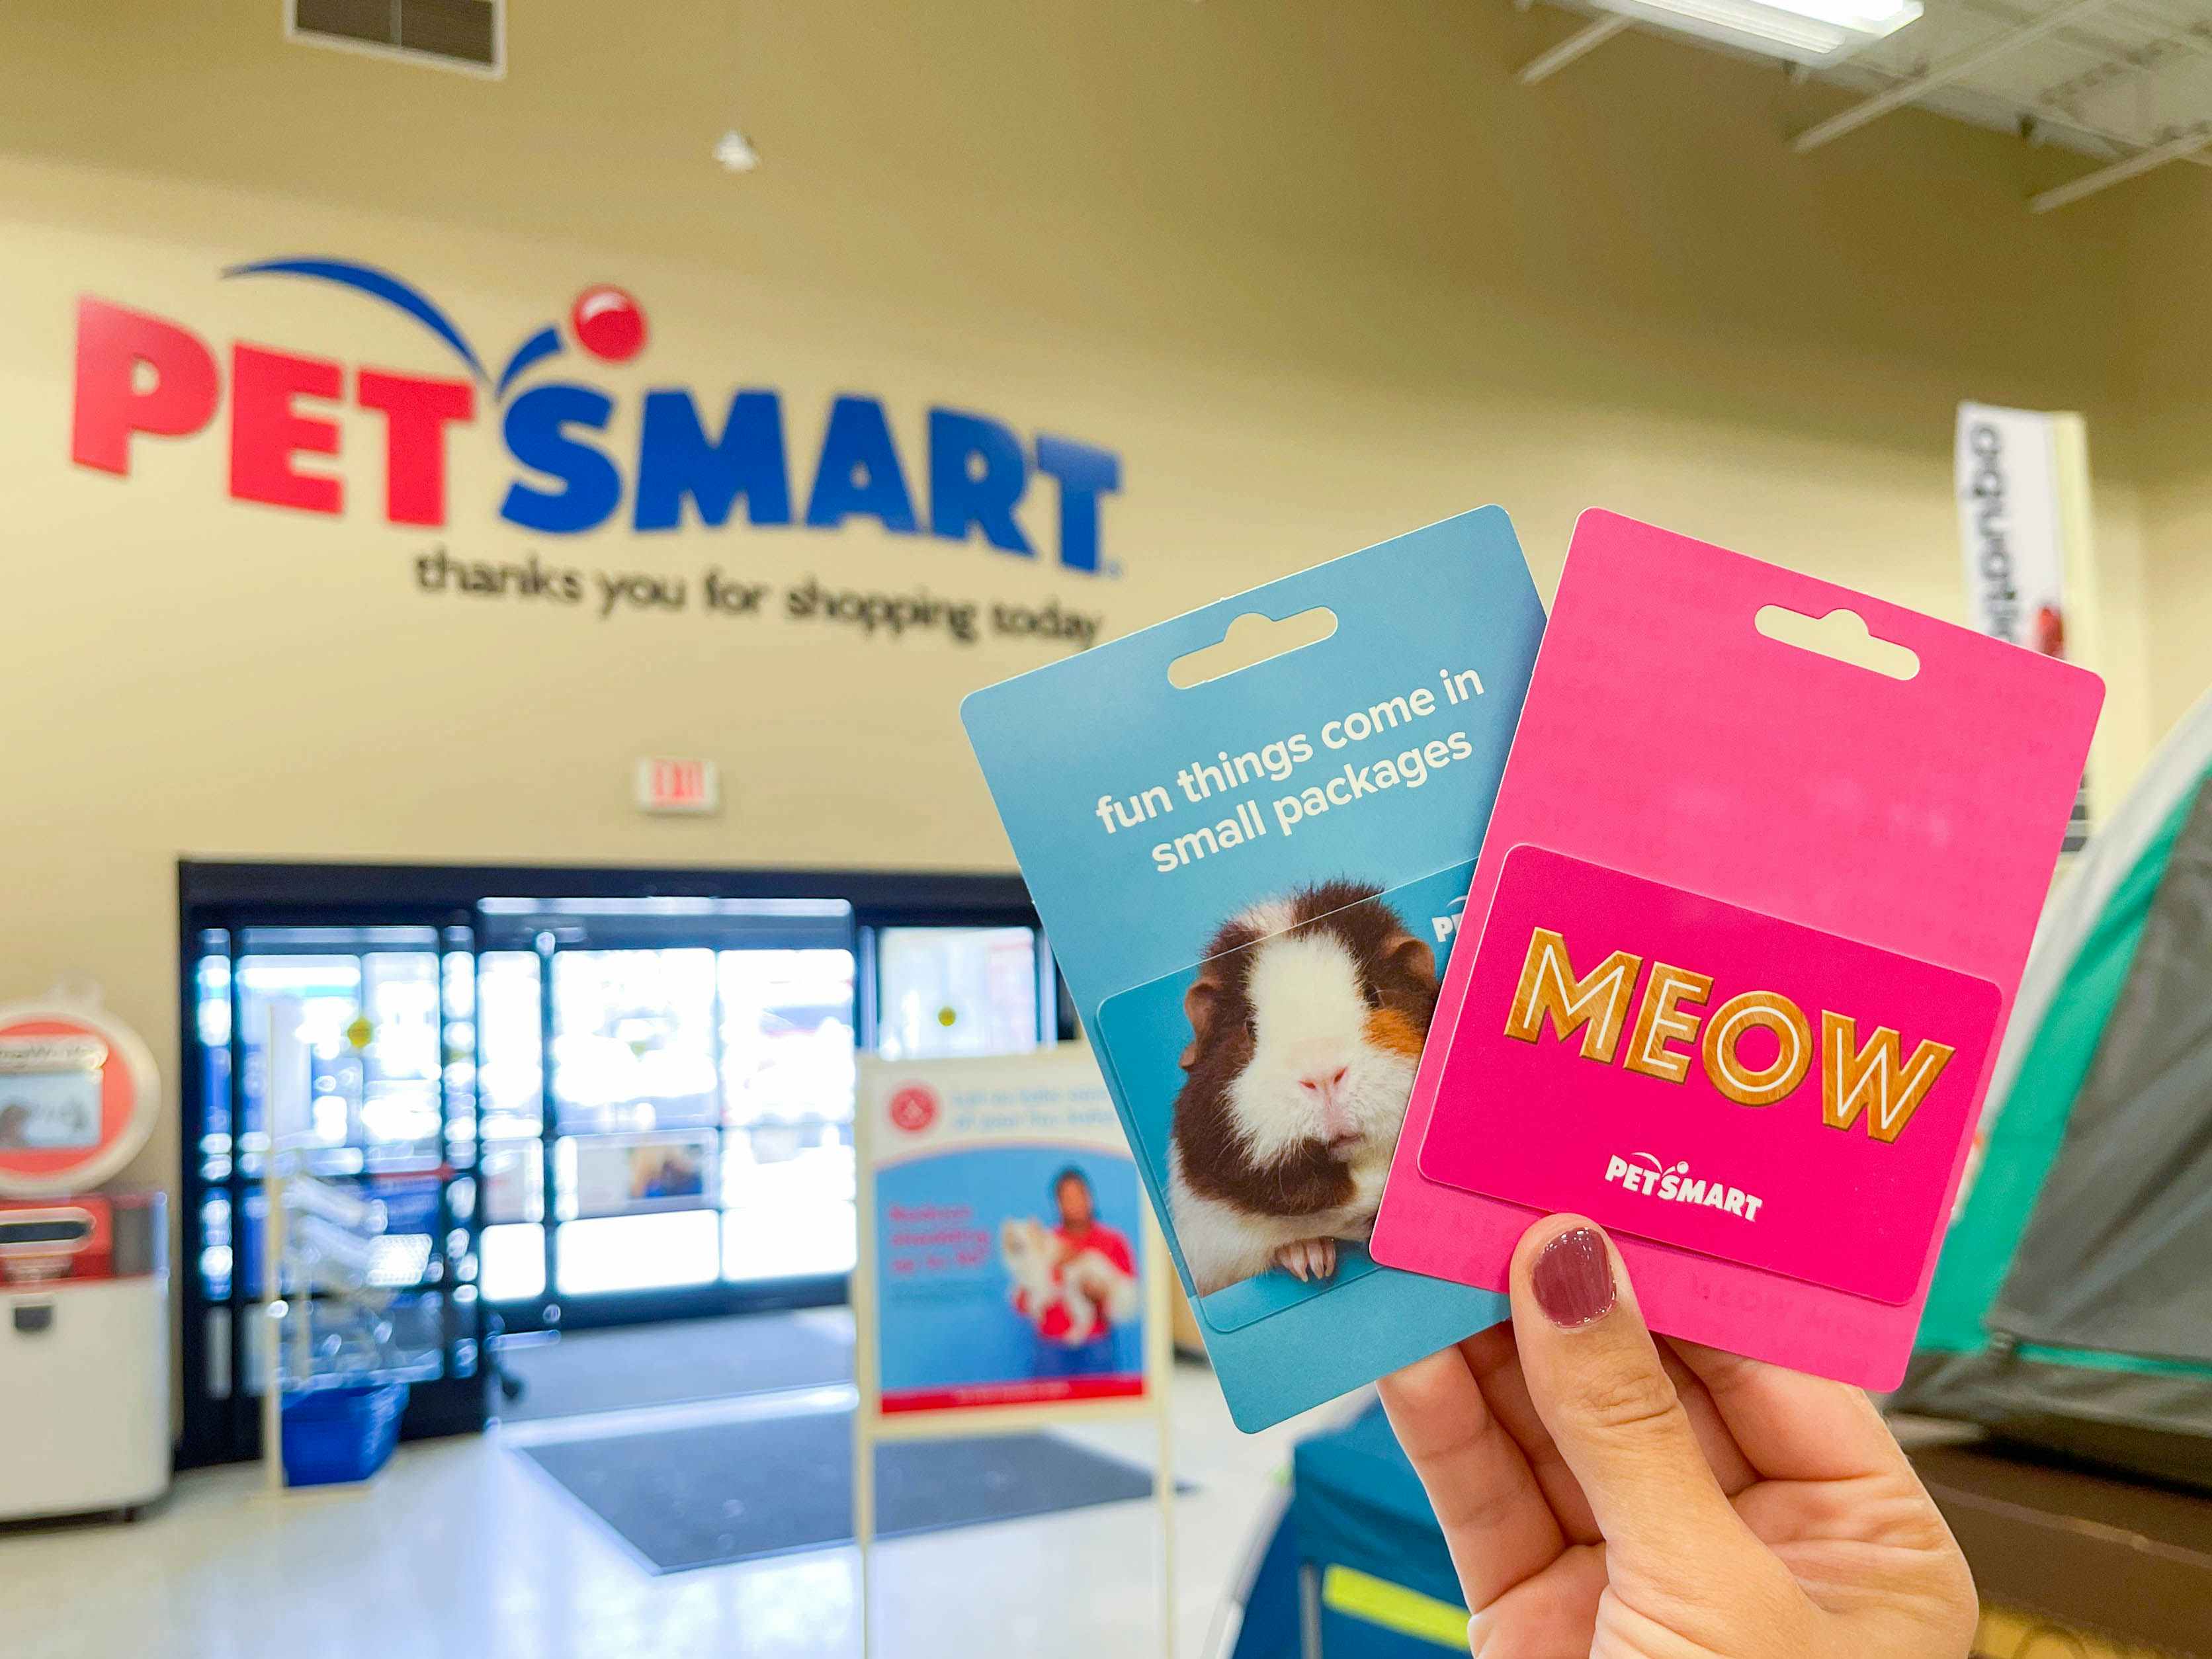 Two PetSmart gift cards being held up inside a PetSmart store, just inside the front door, with the PetSmart logo on the wall in the back...